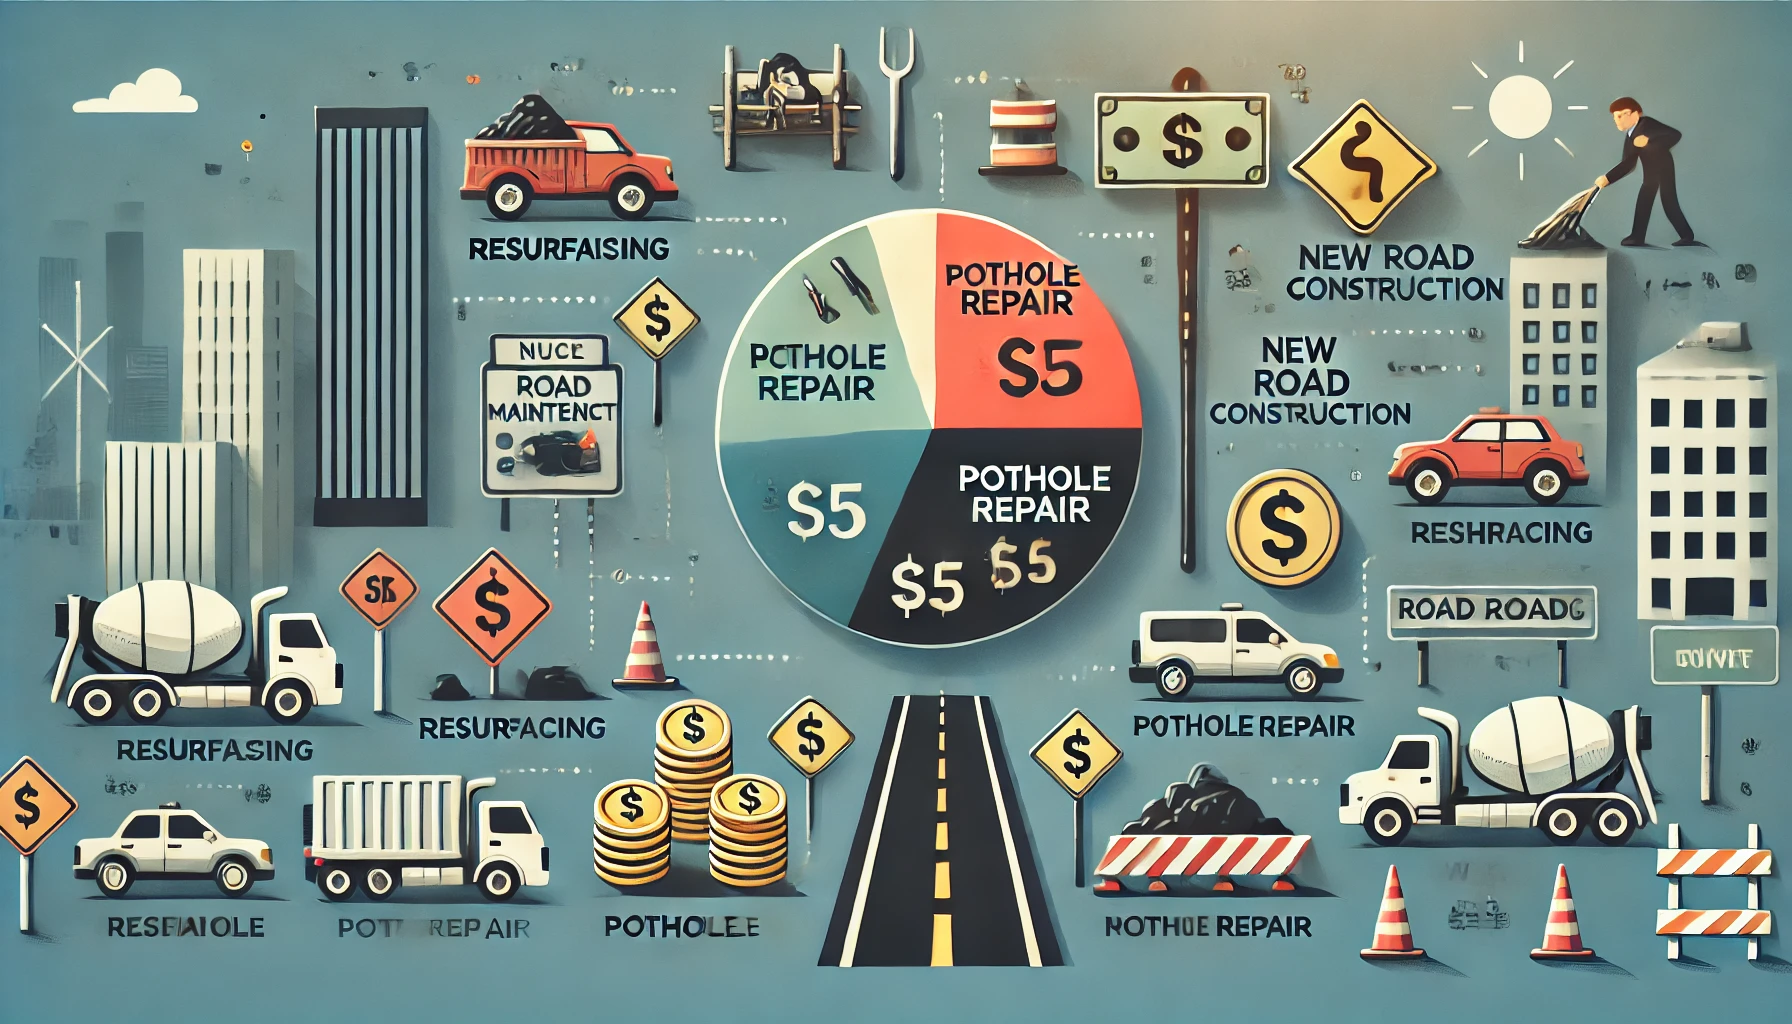 Infographic illustrating road maintenance funding and budget allocation with a pie chart showing categories like resurfacing, pothole repair, and new road construction. Includes dollar signs, stacks of coins, and icons of roads, construction signs, and traffic cones against a cityscape background with roads and vehicles.